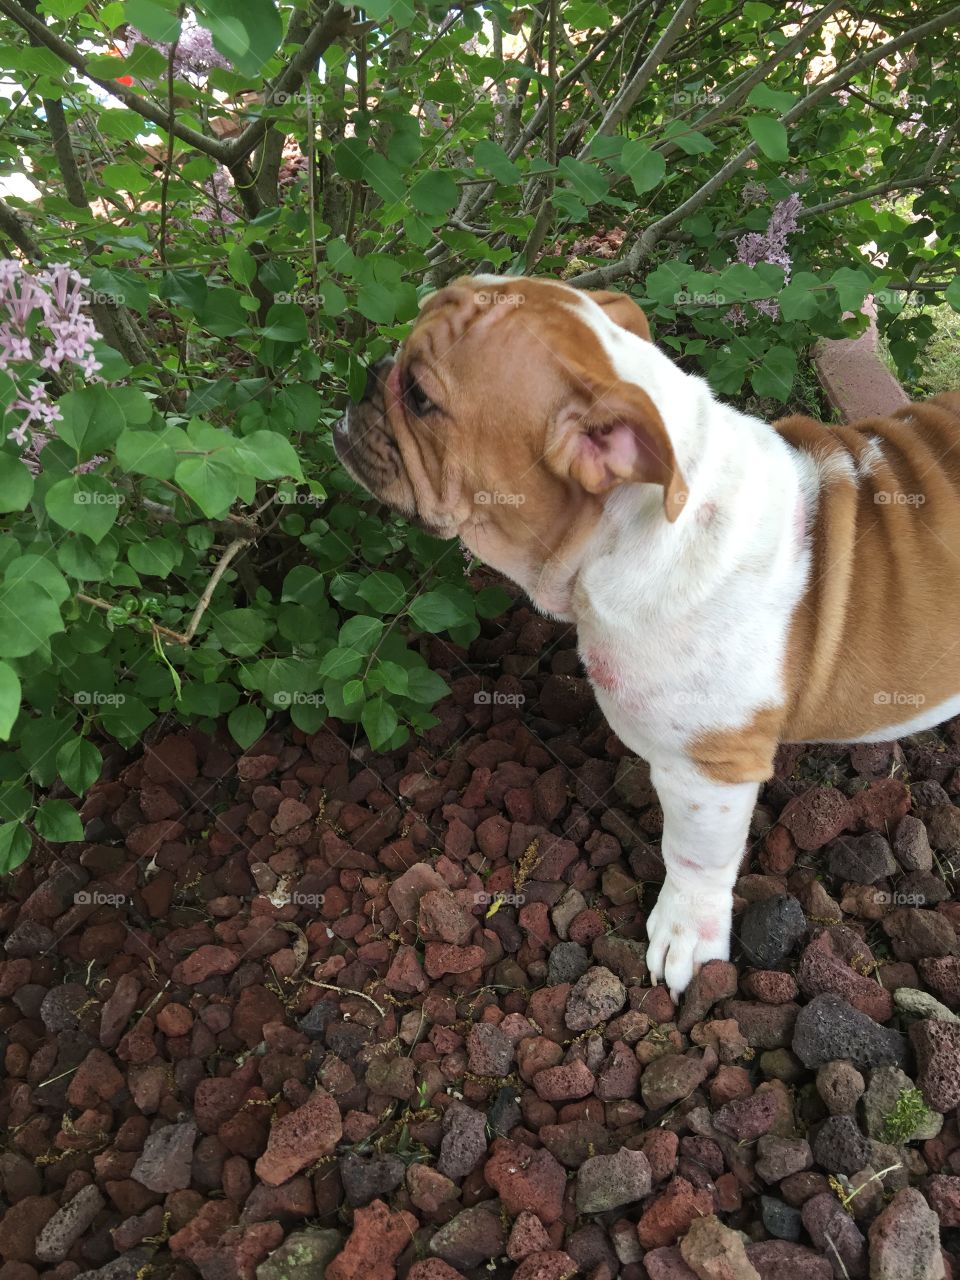 Smelling the Flowers
